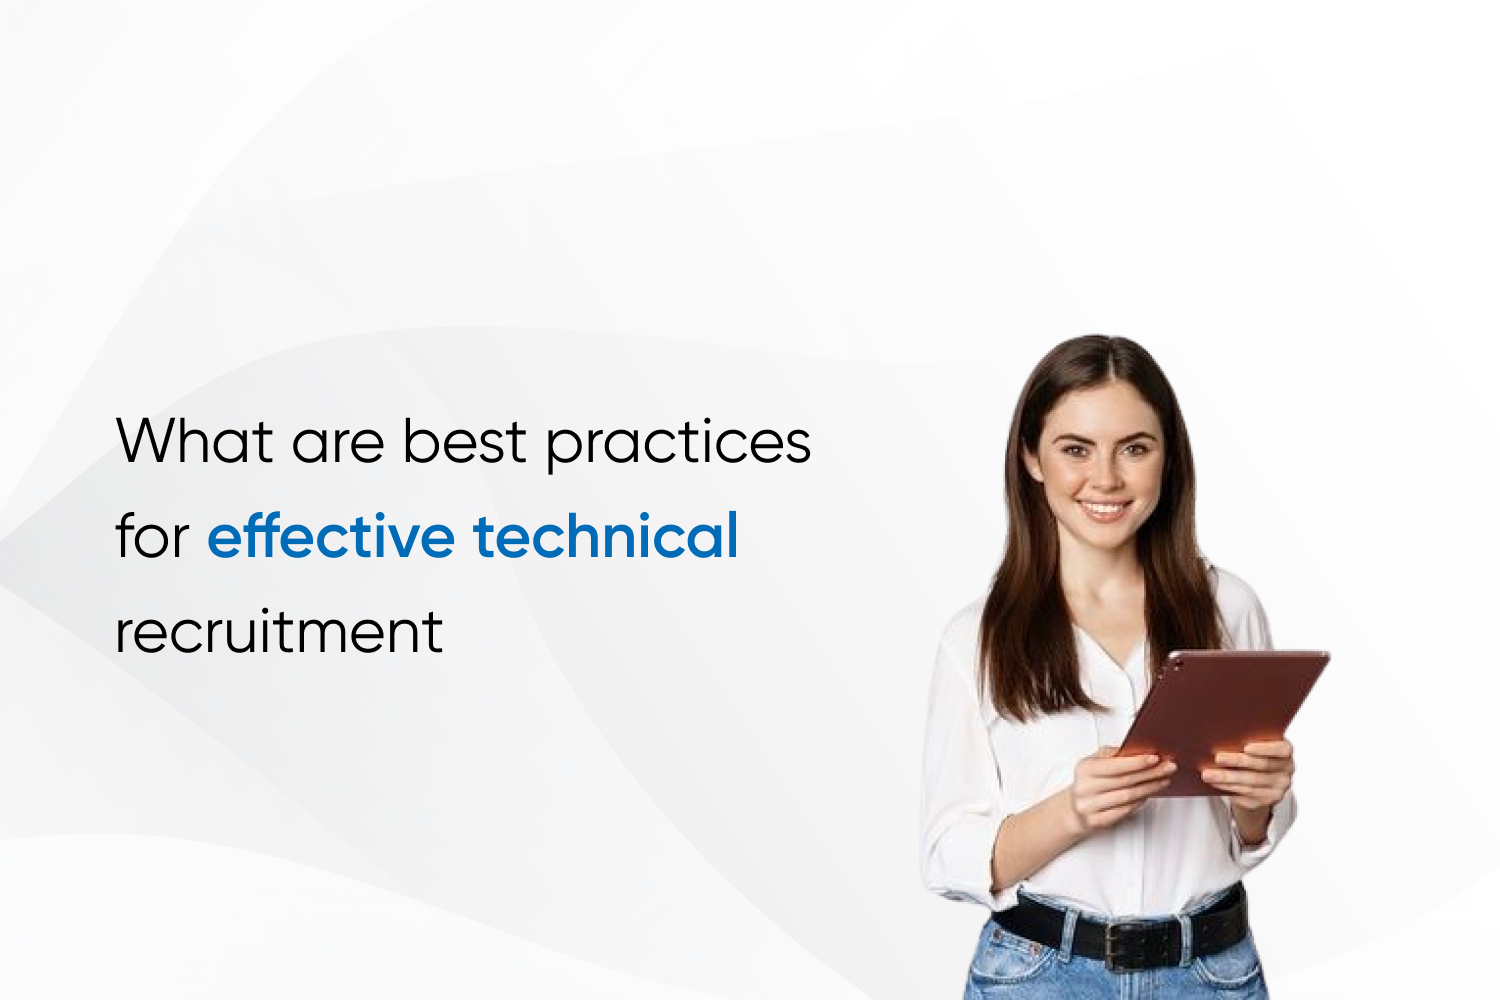 What are best practices for effective technical recruitment